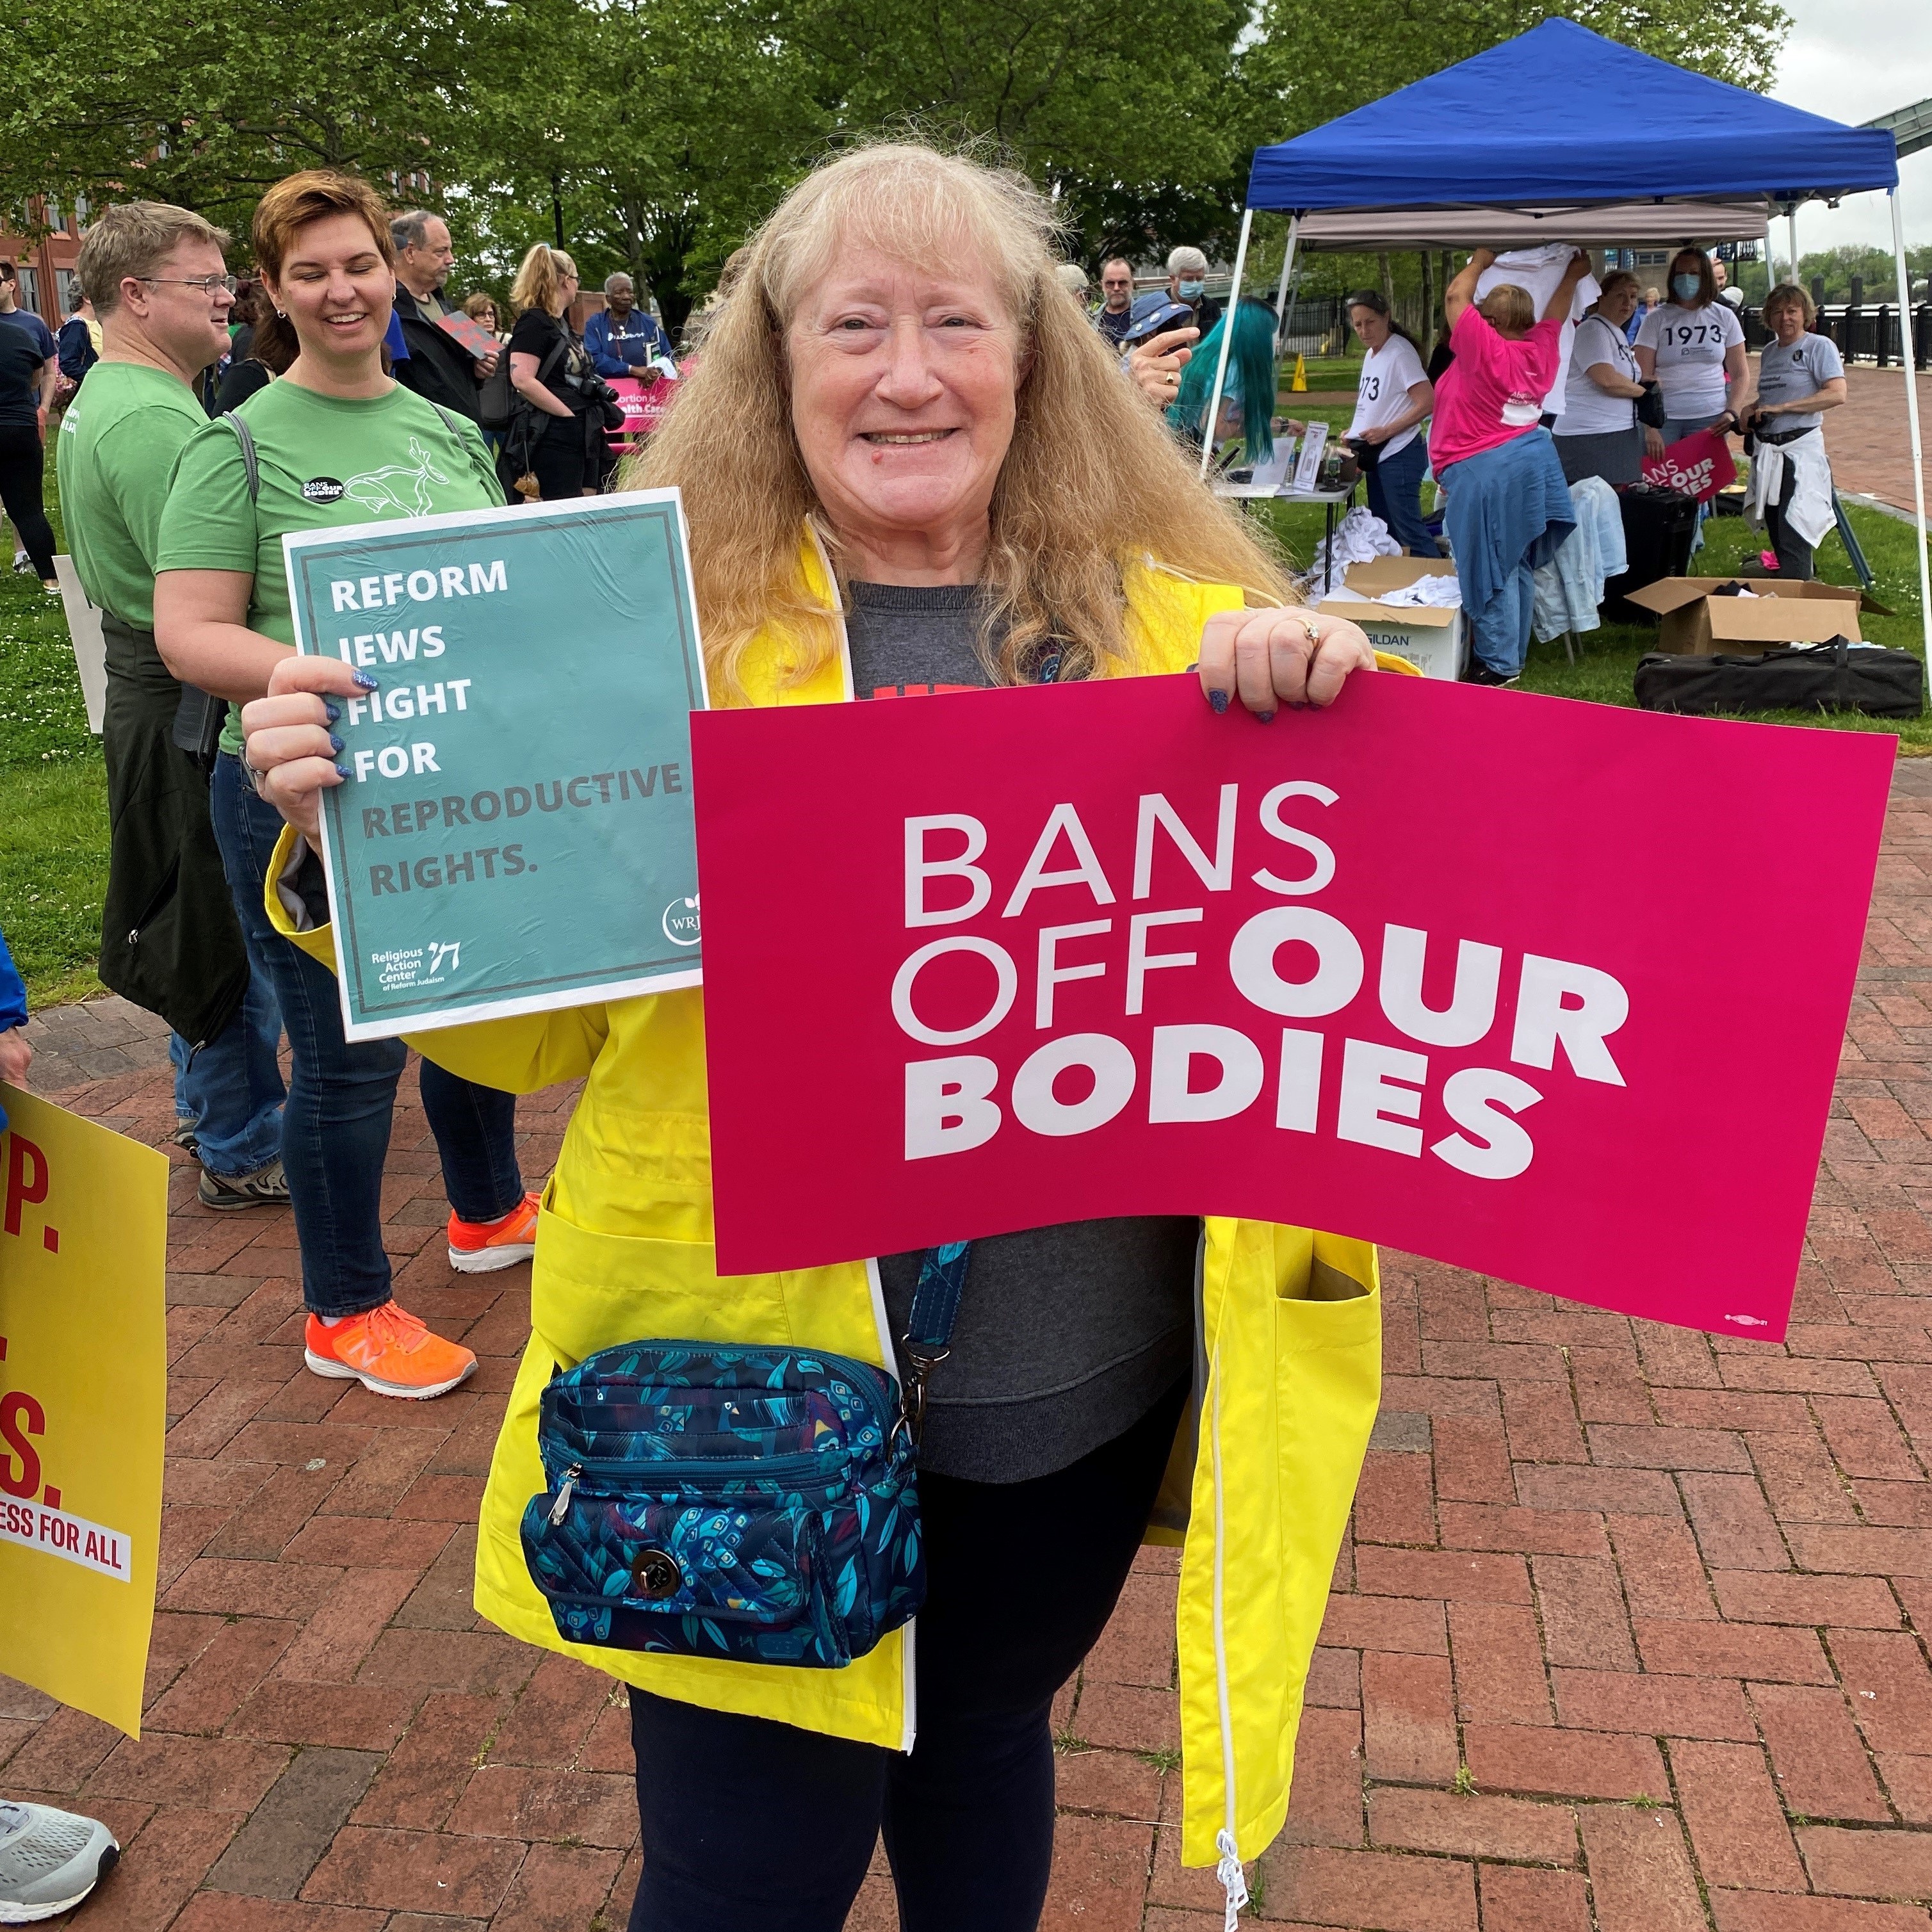 Woman in yellow jacket holding rally signs for "Bans off our Bodies" and Reform Jews for Reproductive RIghts